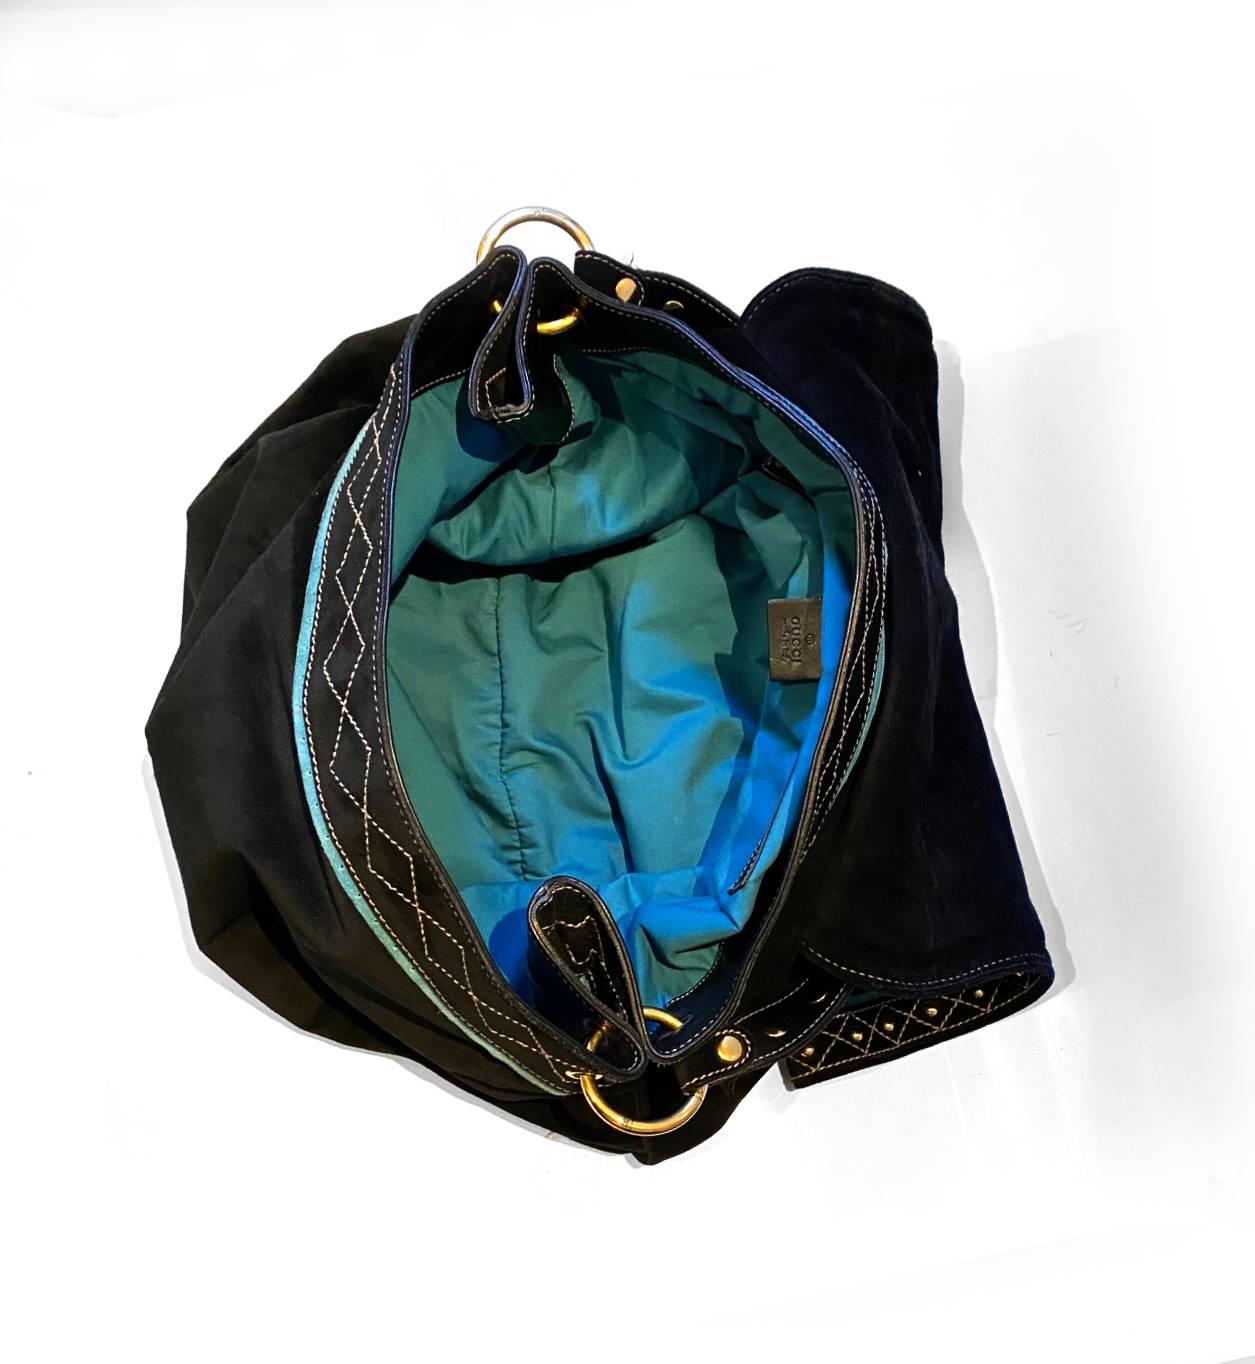 2000s Gucci Large Shoulder Hobo Bag in navy blue suede, flap closure, multiple Gucci Stemma in gold tone metal at the front lap, stud details, crisscross stitching details, gold tone hardware, navy blue lining, inside pocket, shoulder strap with